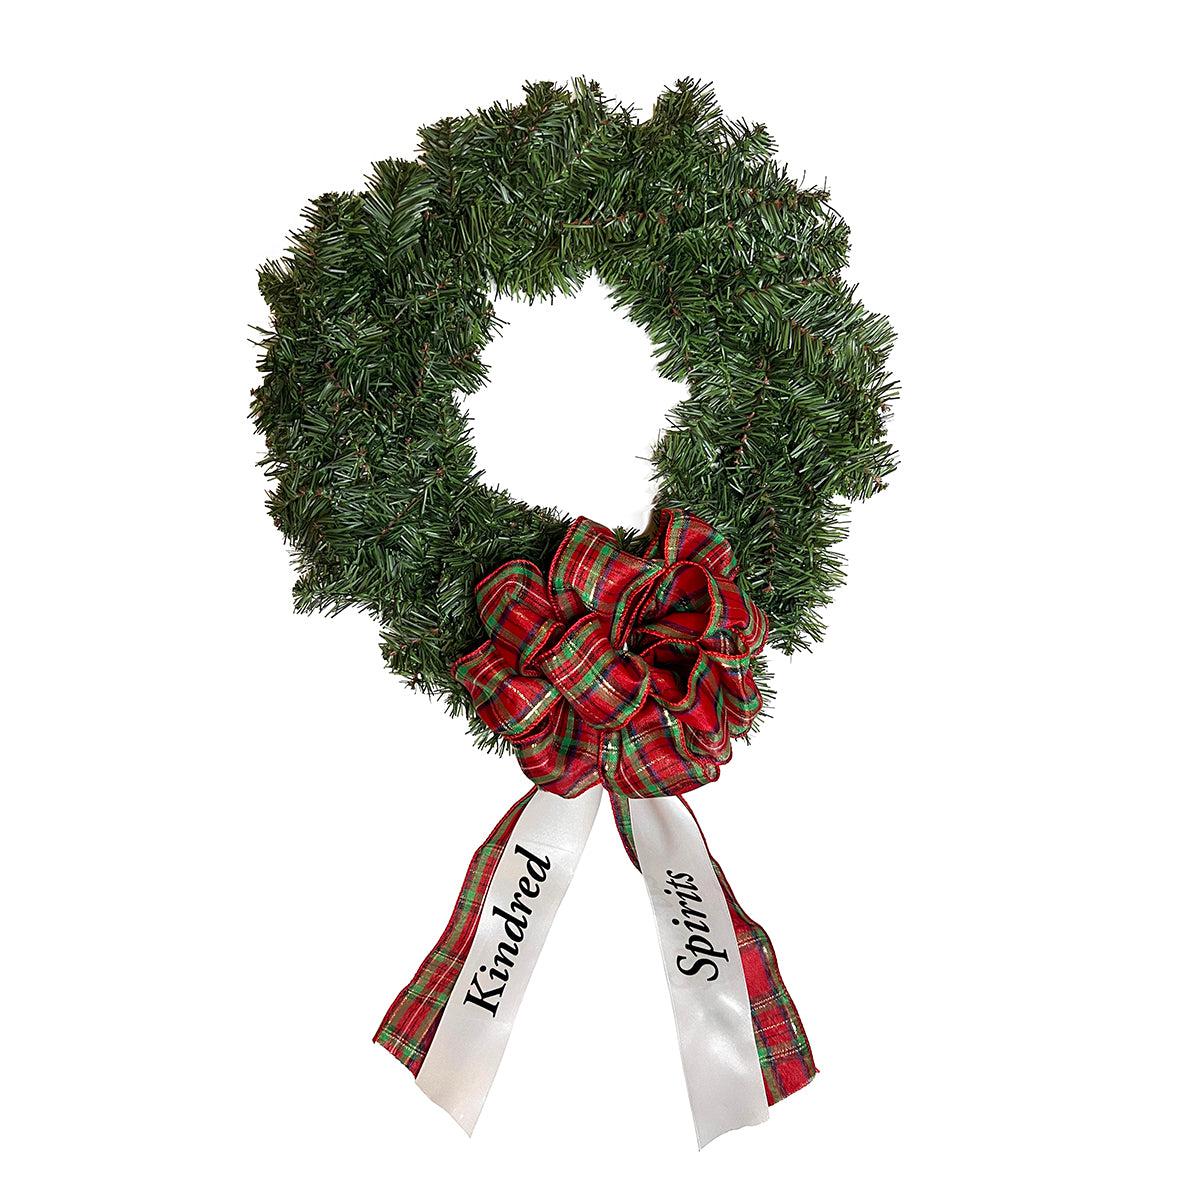 Kindred Spirits Holiday Wreath: 16 inches